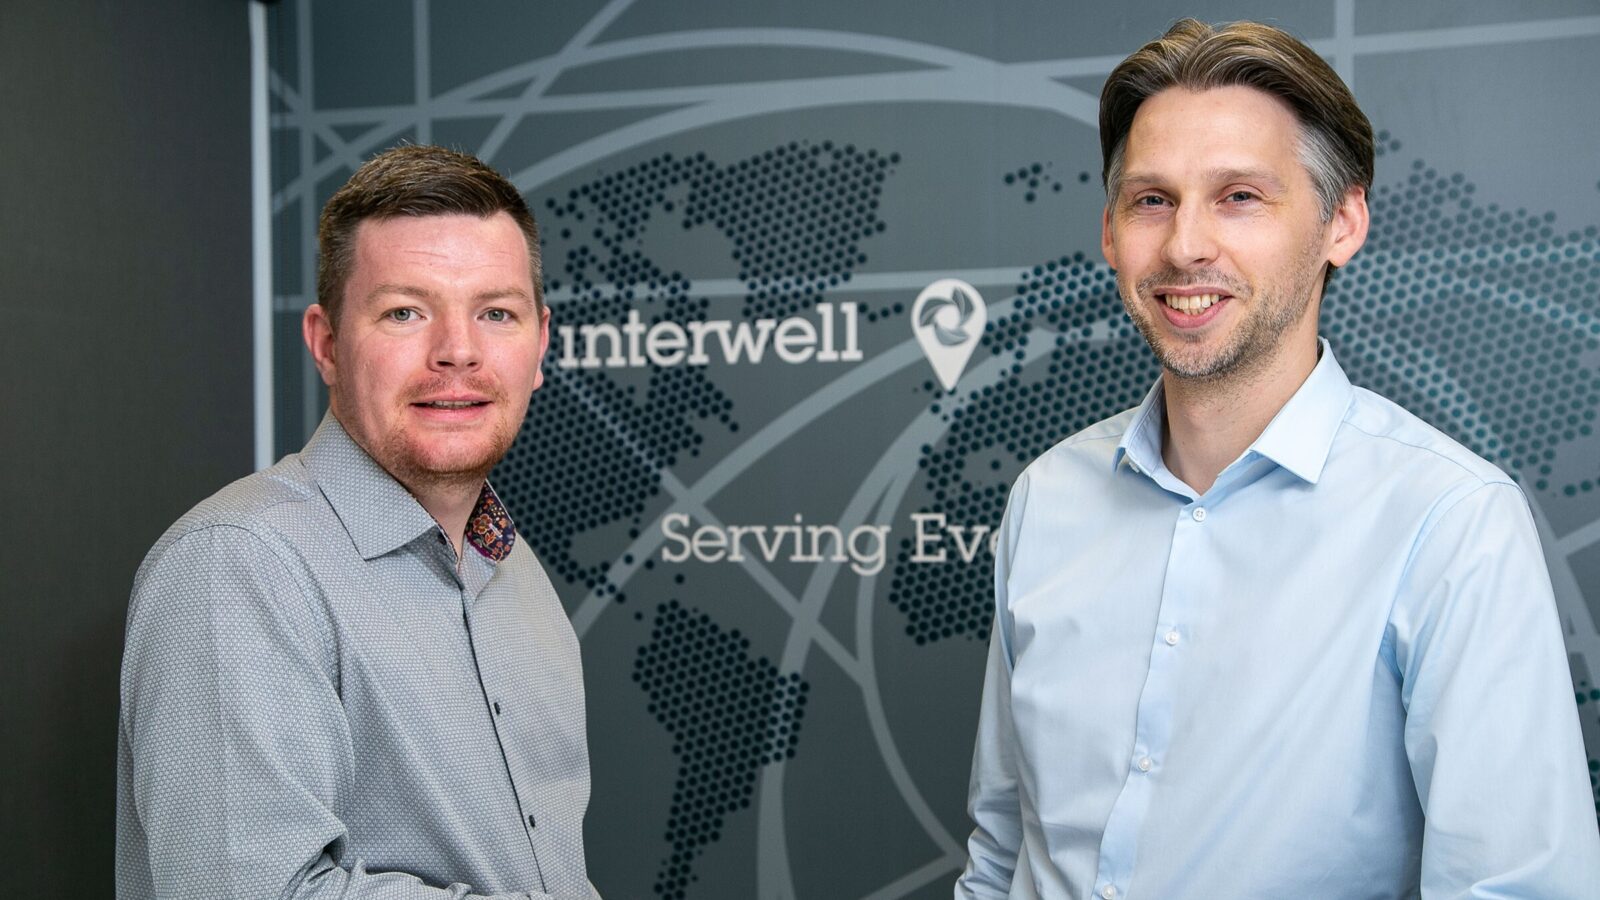 Interwell announces two new key appointments